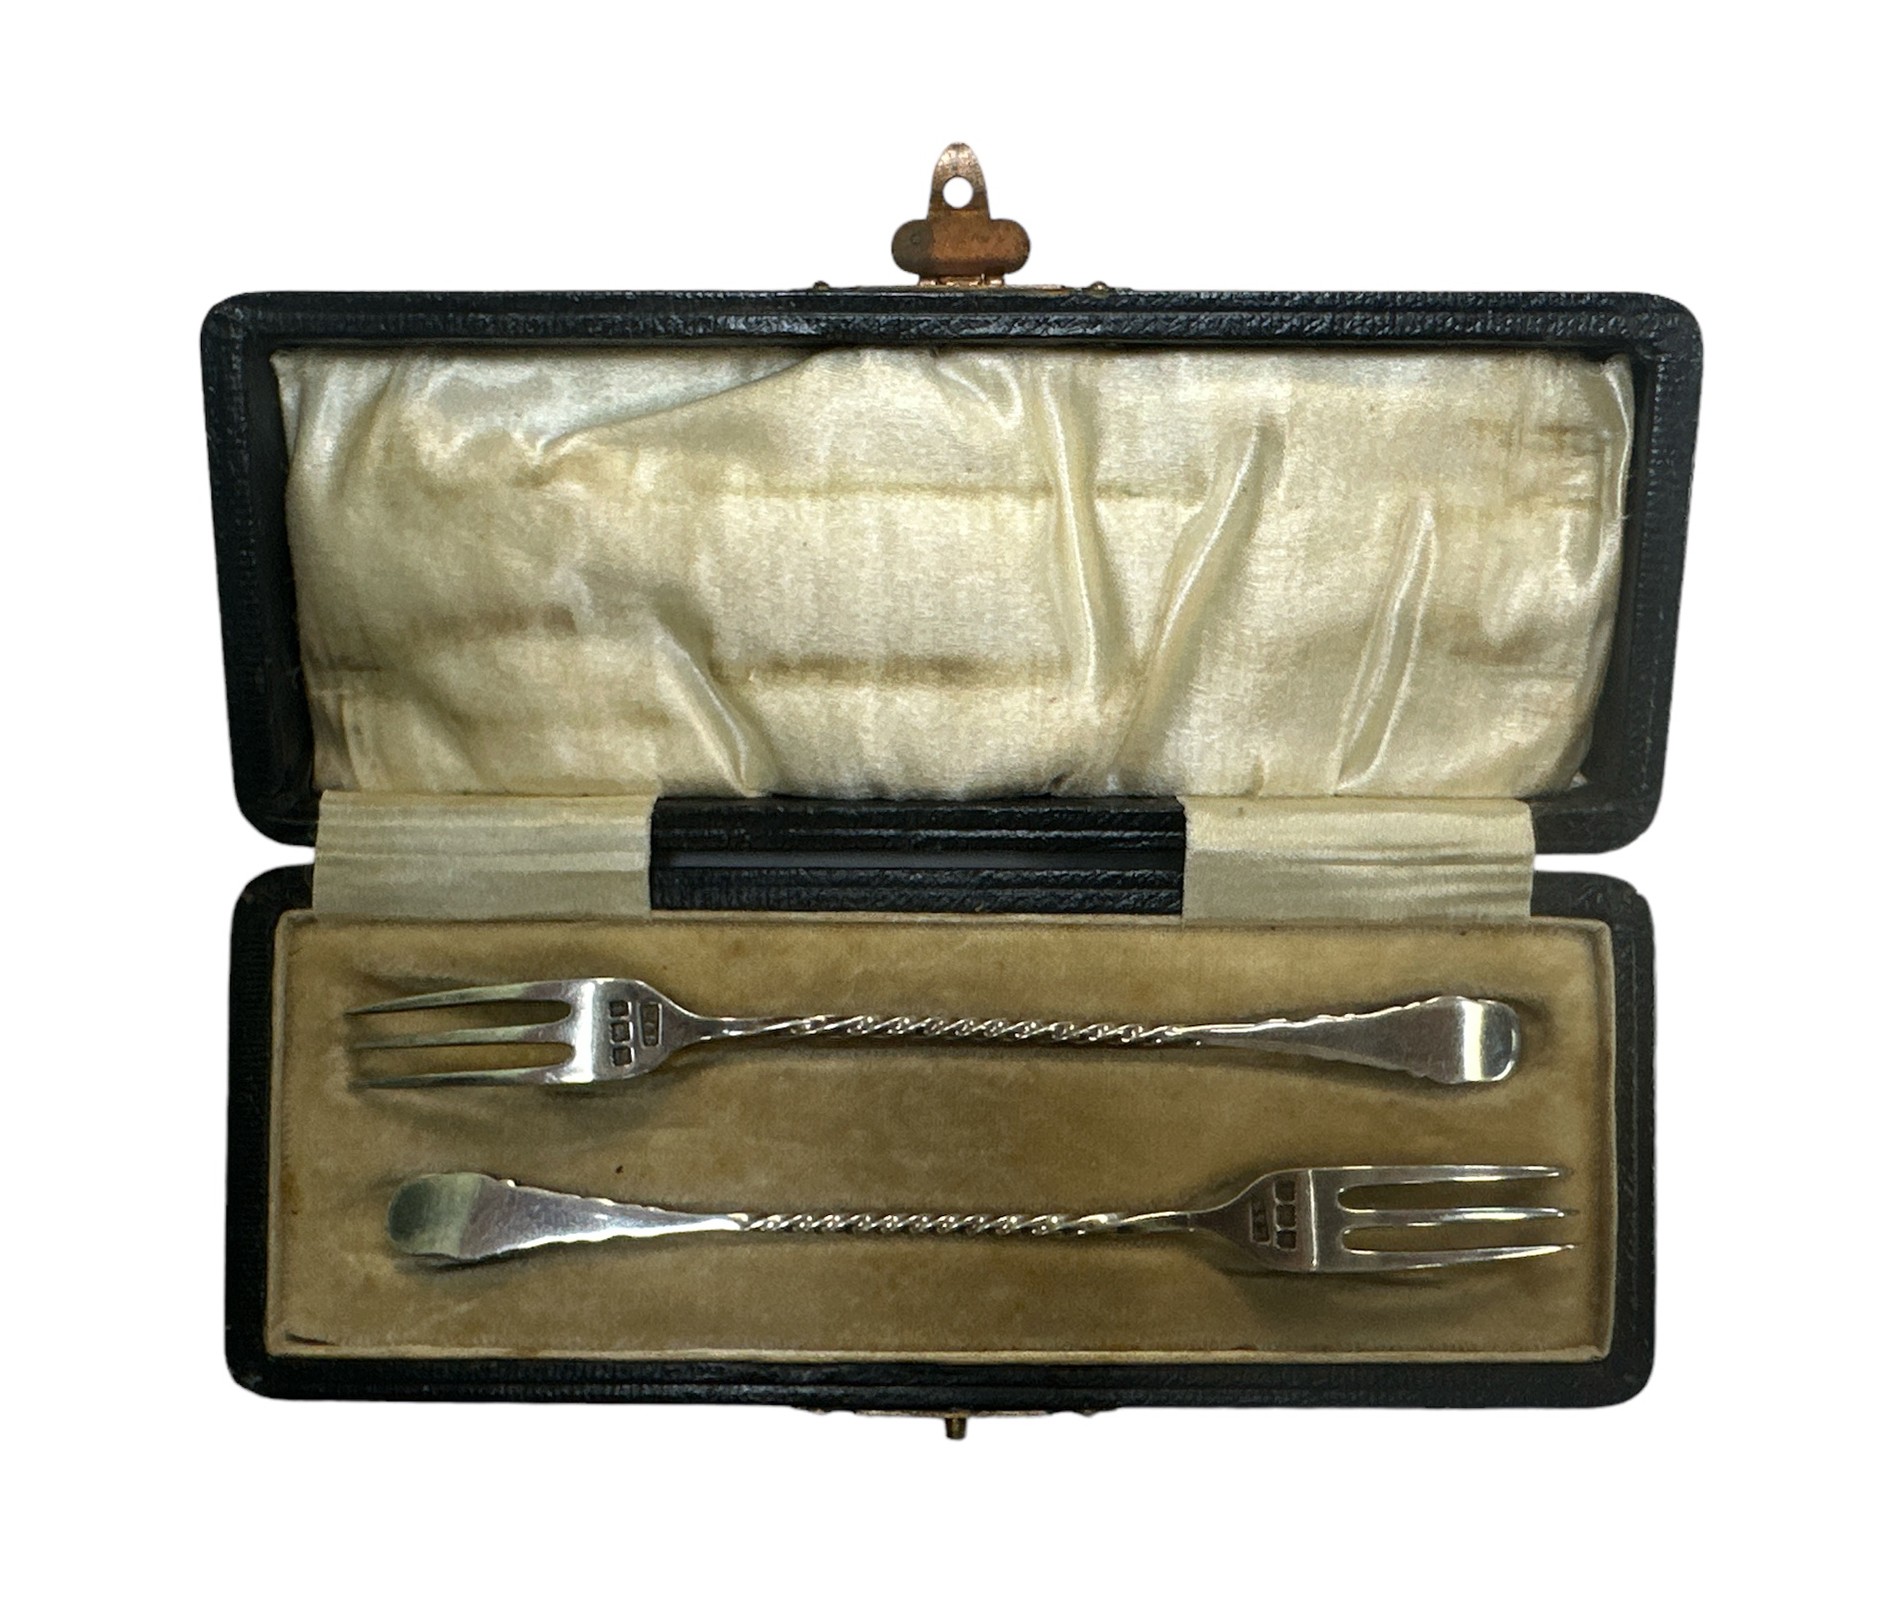 Levi & Salaman cased pair of silver pickle forks, Birmingham 1911, combined weight approx. 14.8g - Image 2 of 3